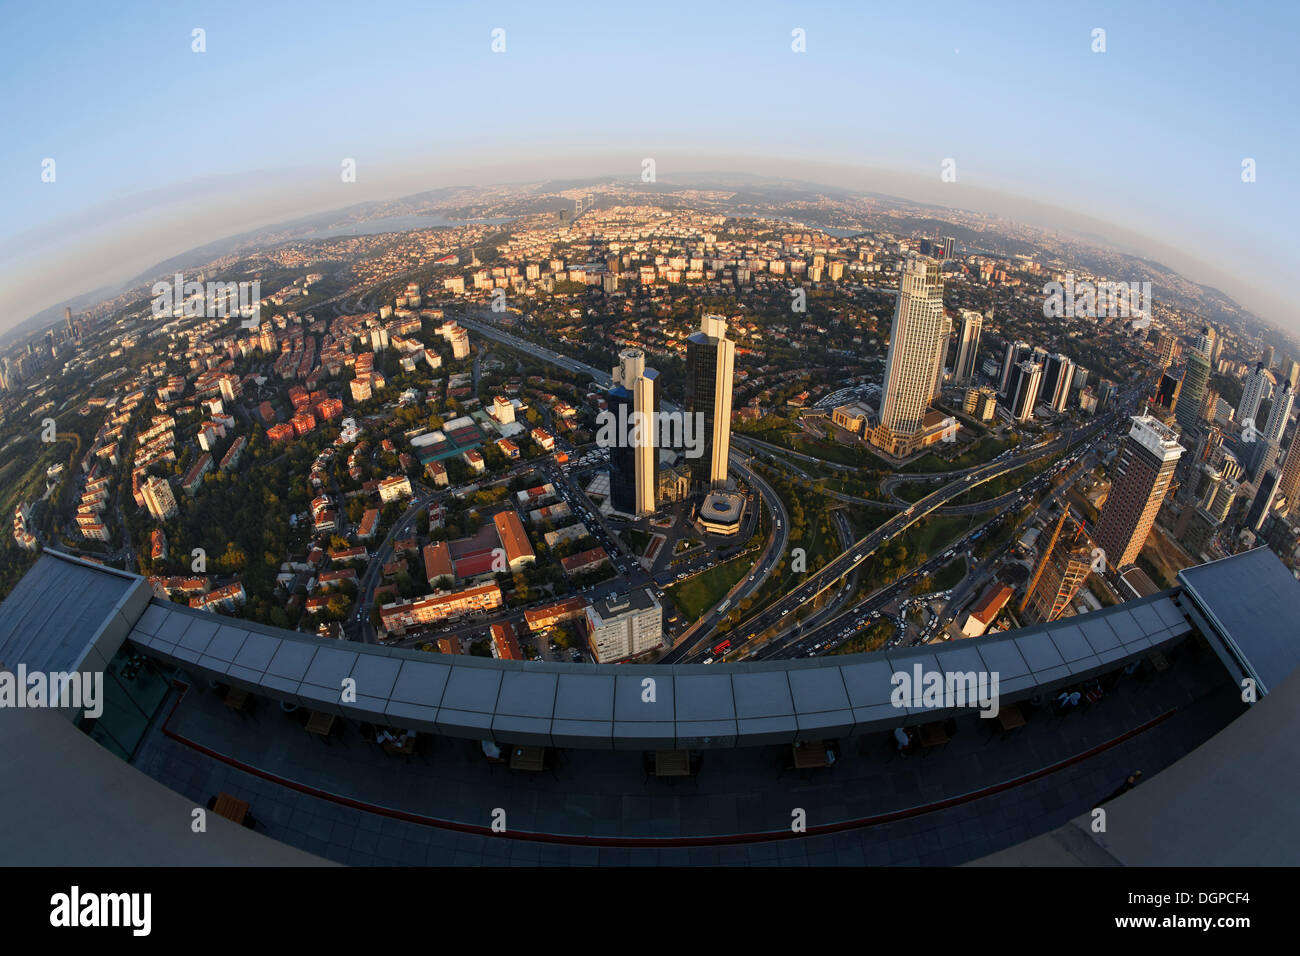 View from the Sapphire Tower in Levent with views of the Bosphorus, tallest building in Turkey, Istanbul, Turkey, Europe Stock Photo